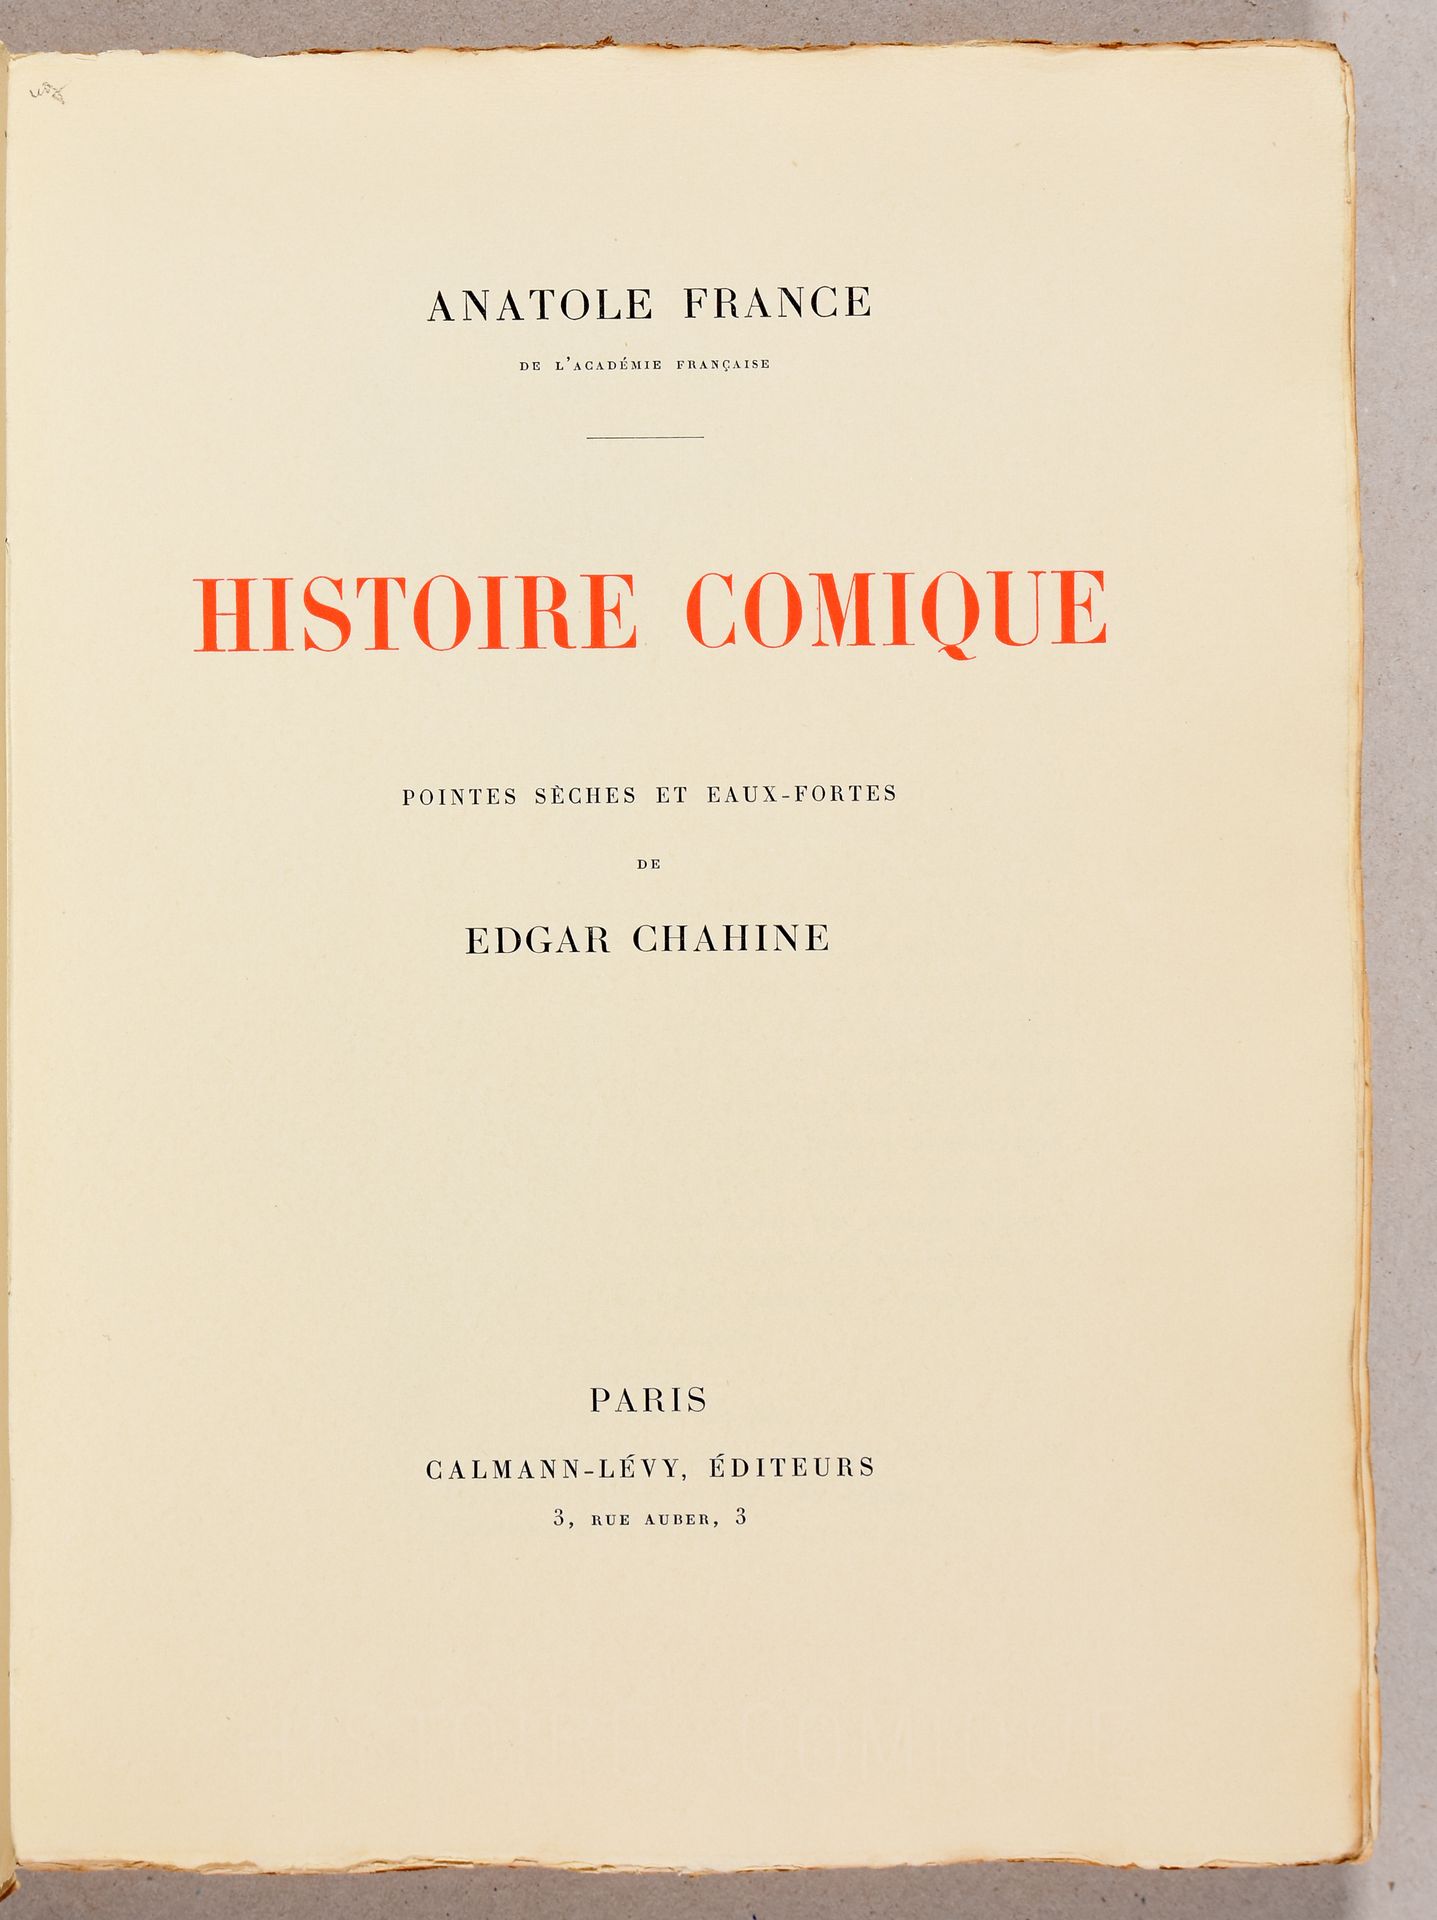 Chahine, Edgar FRANCE, Anatole Histoire comique. Drypoints and etchings by Edgar&hellip;